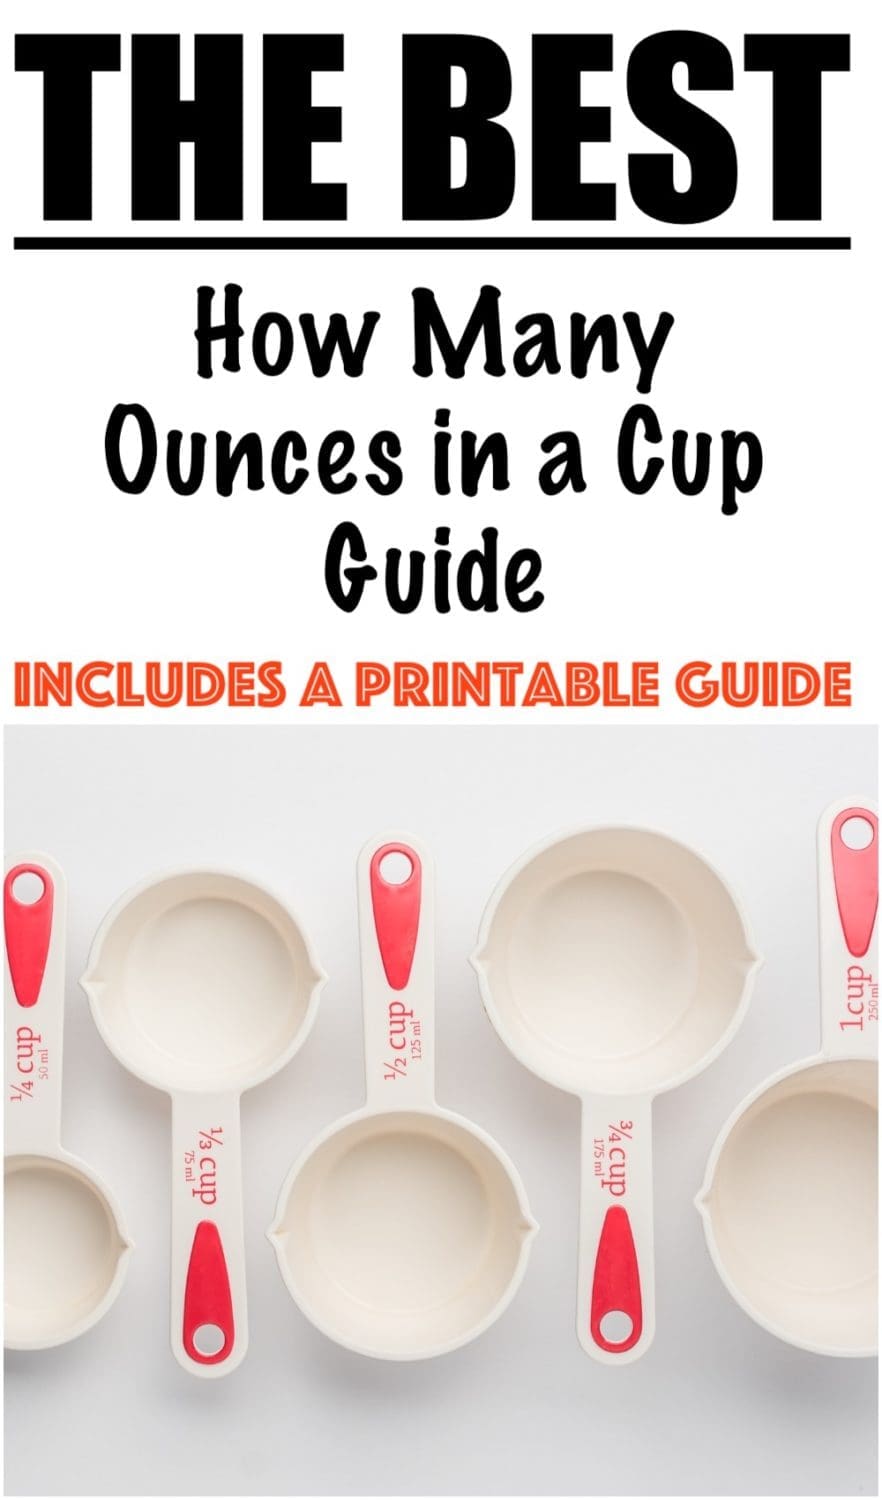 How Many Ounces are in a Cup